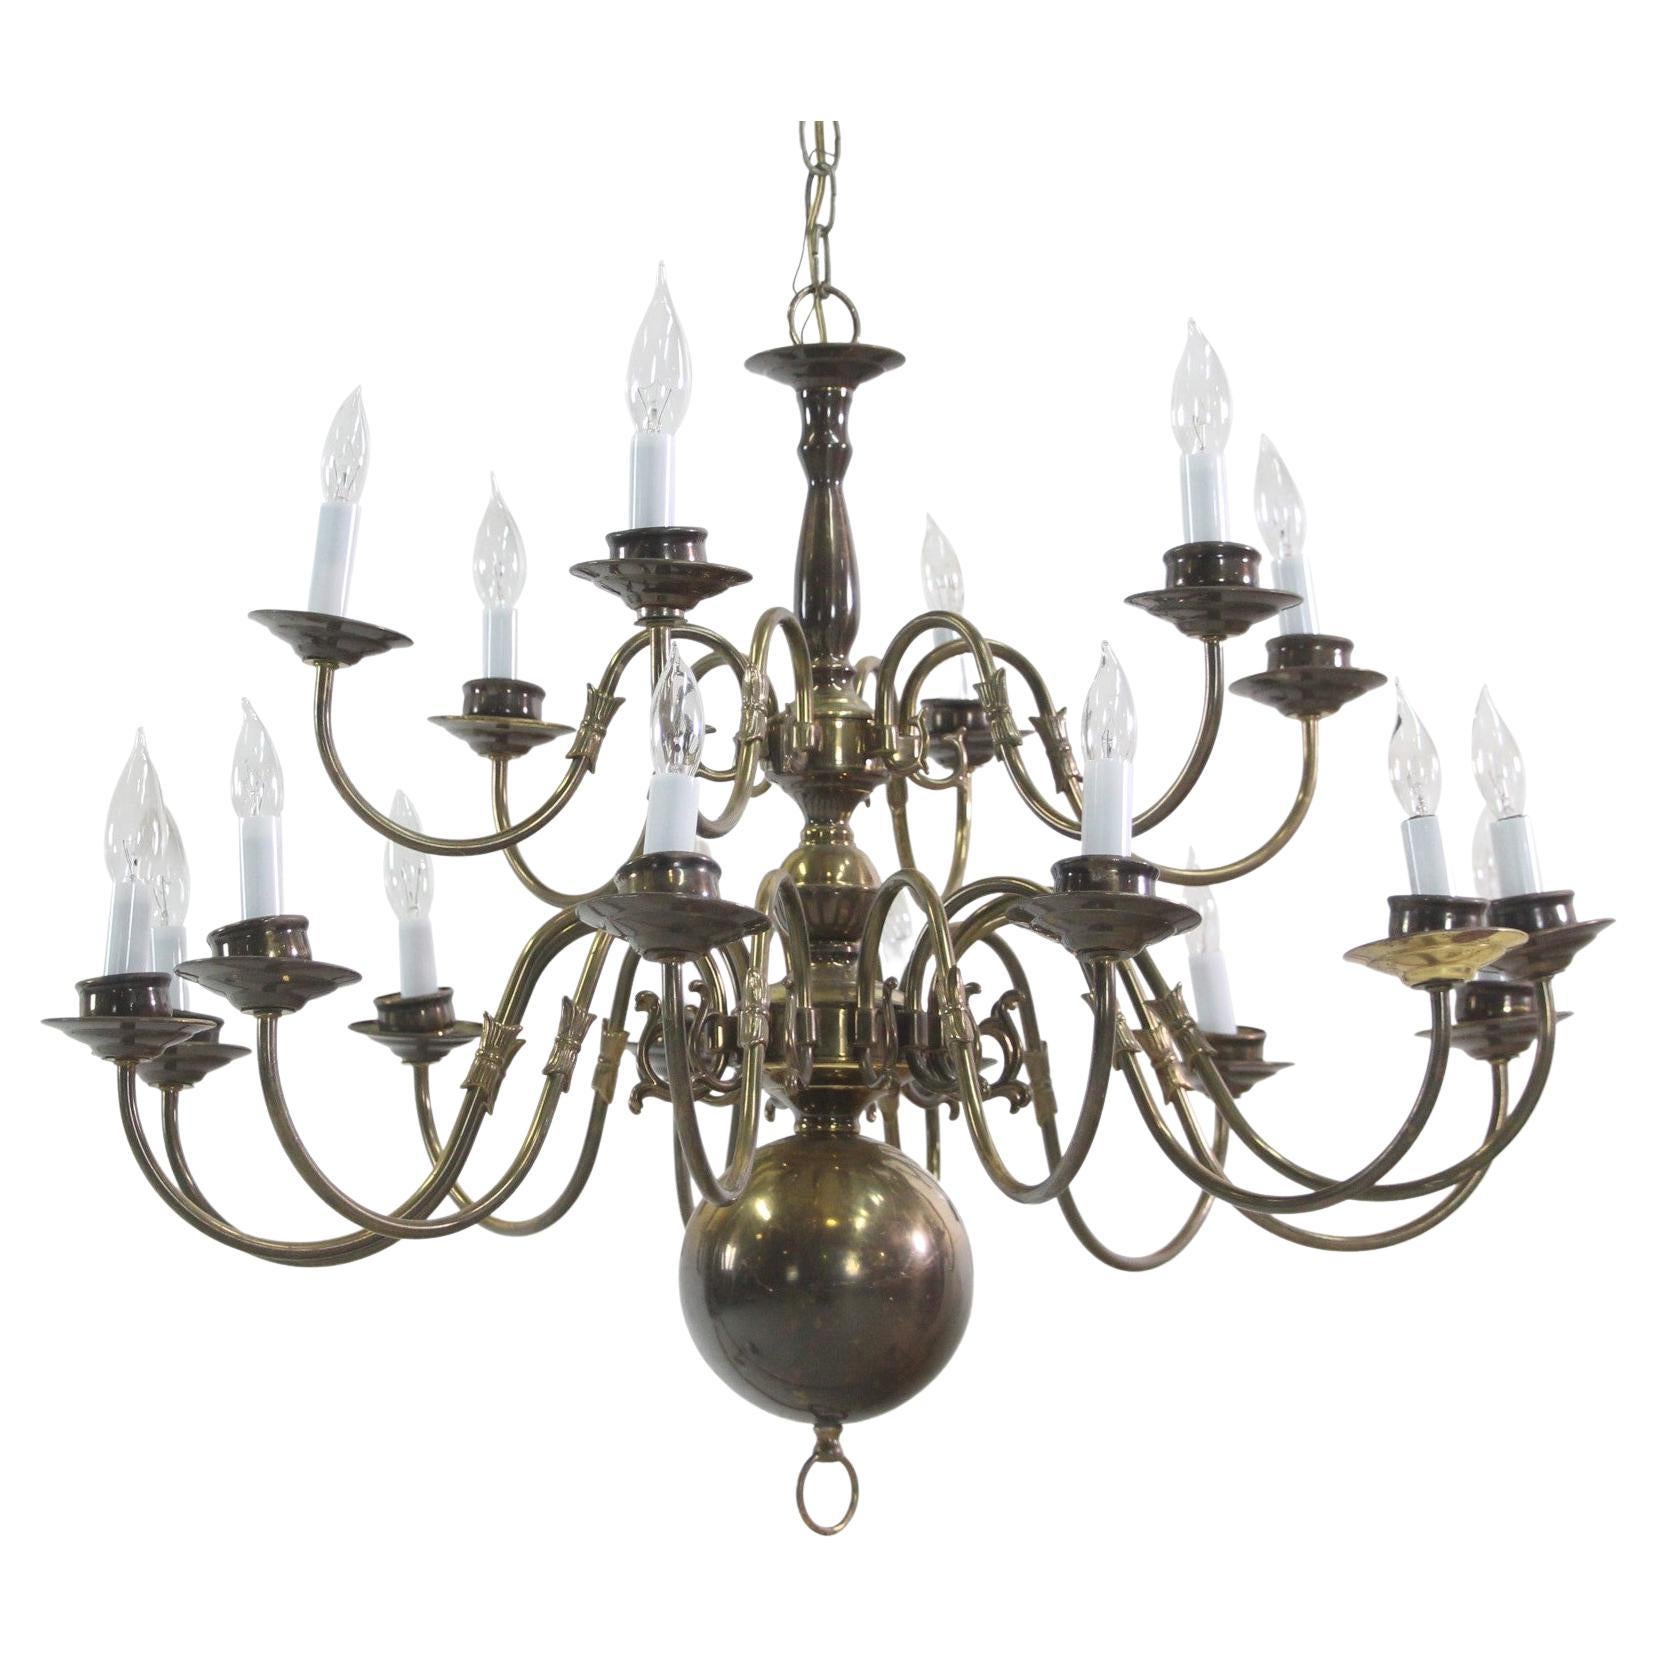 Early 1900s Brass Williamsburg Style Chandelier with 18 Arms and Lights